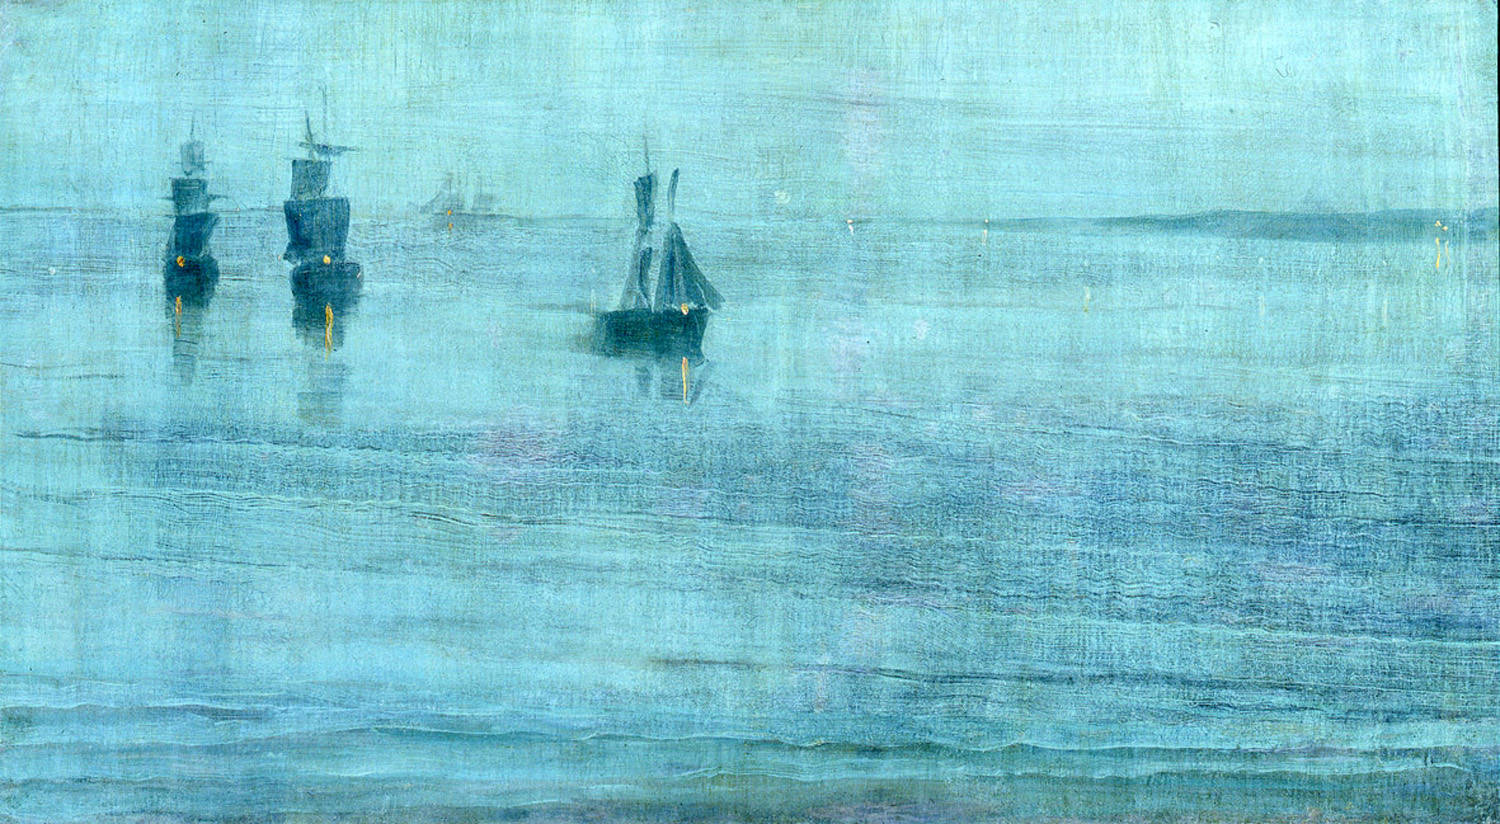 Nocturne: The Solent by James Abbott McNeill Whistler - 1886 - 50.2 x 91.5 cm Gilcrease Museum